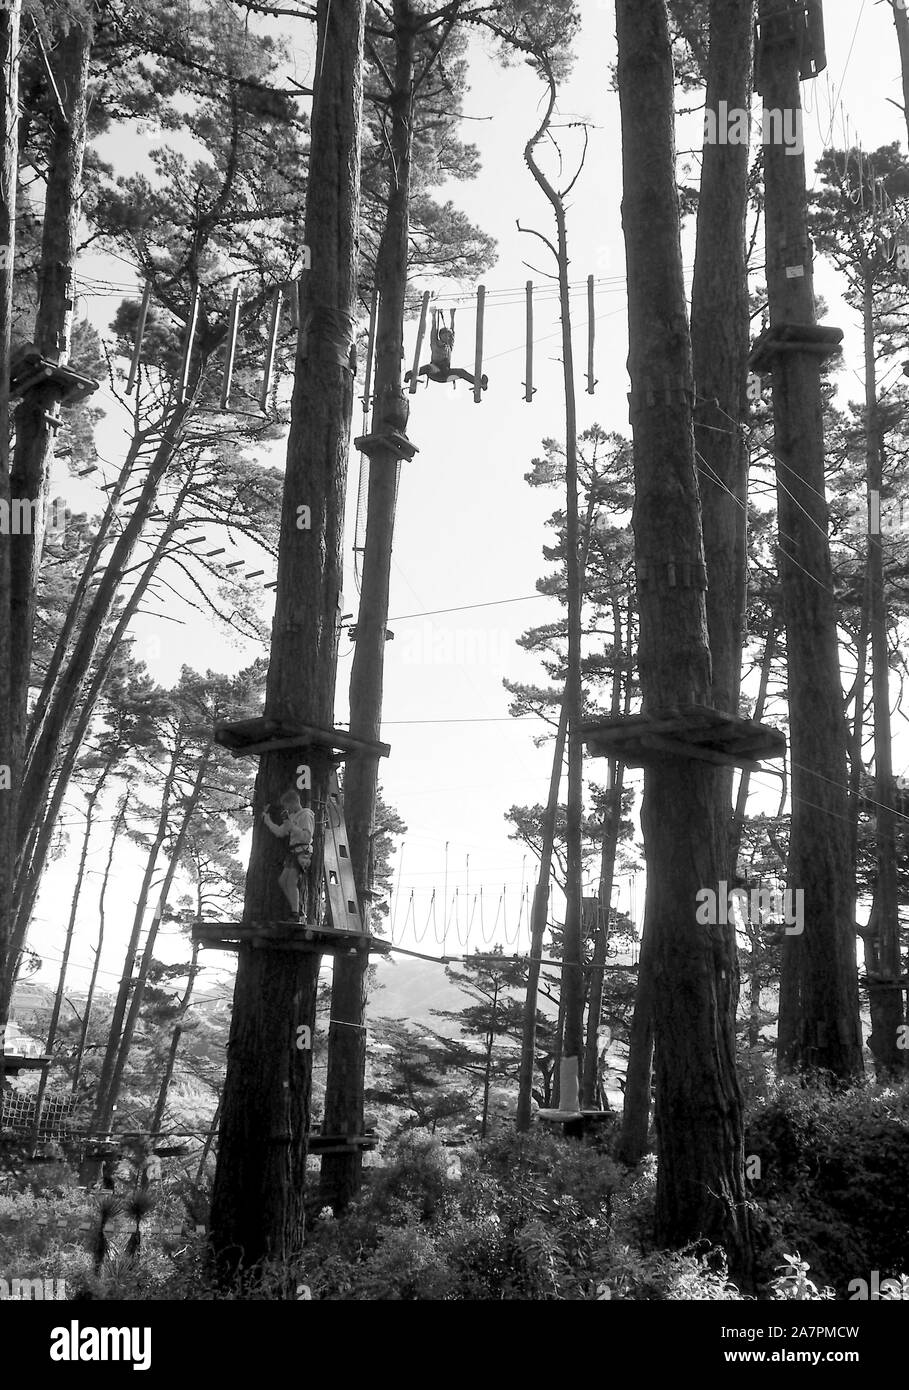 Woman (60) walking on wire, 20 mt above ground in an aerial obstacle course, in the pine tree canopy at Adrenalin Forest, Wellington, NZ Stock Photo